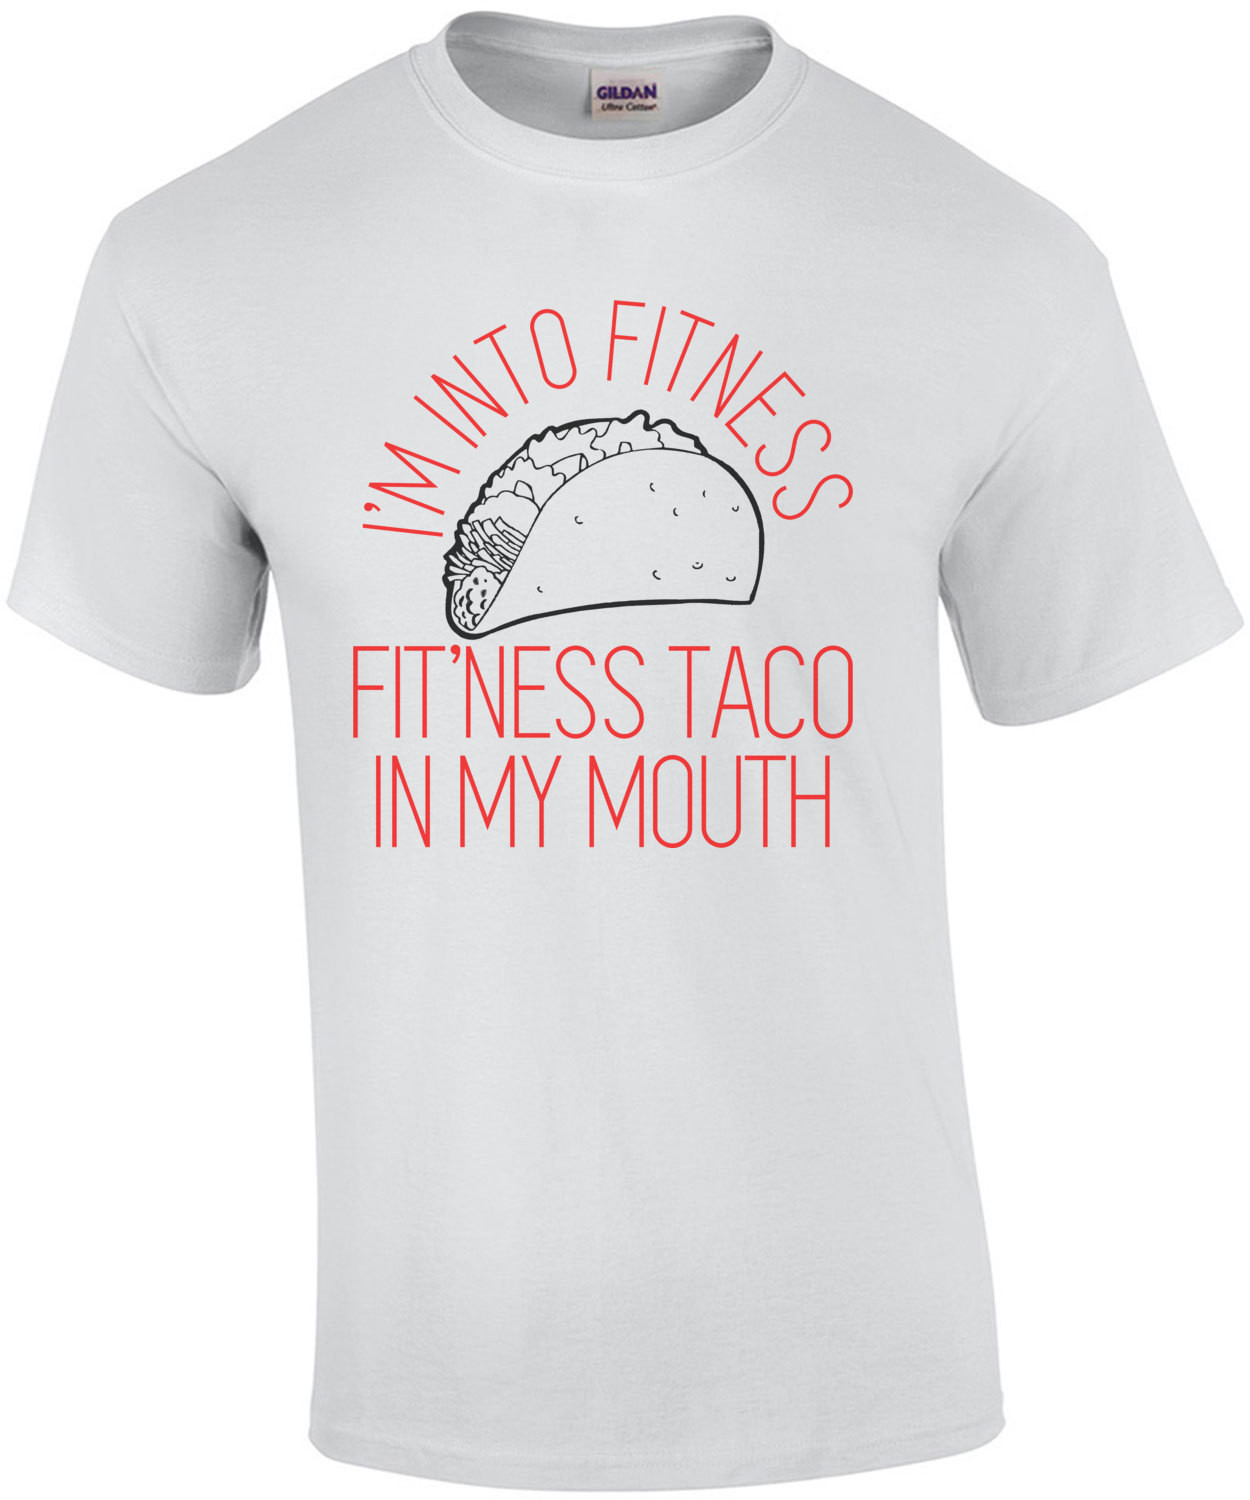 I'm Into Fitness, Fit'ness Taco In My Mouth Funny Shirt